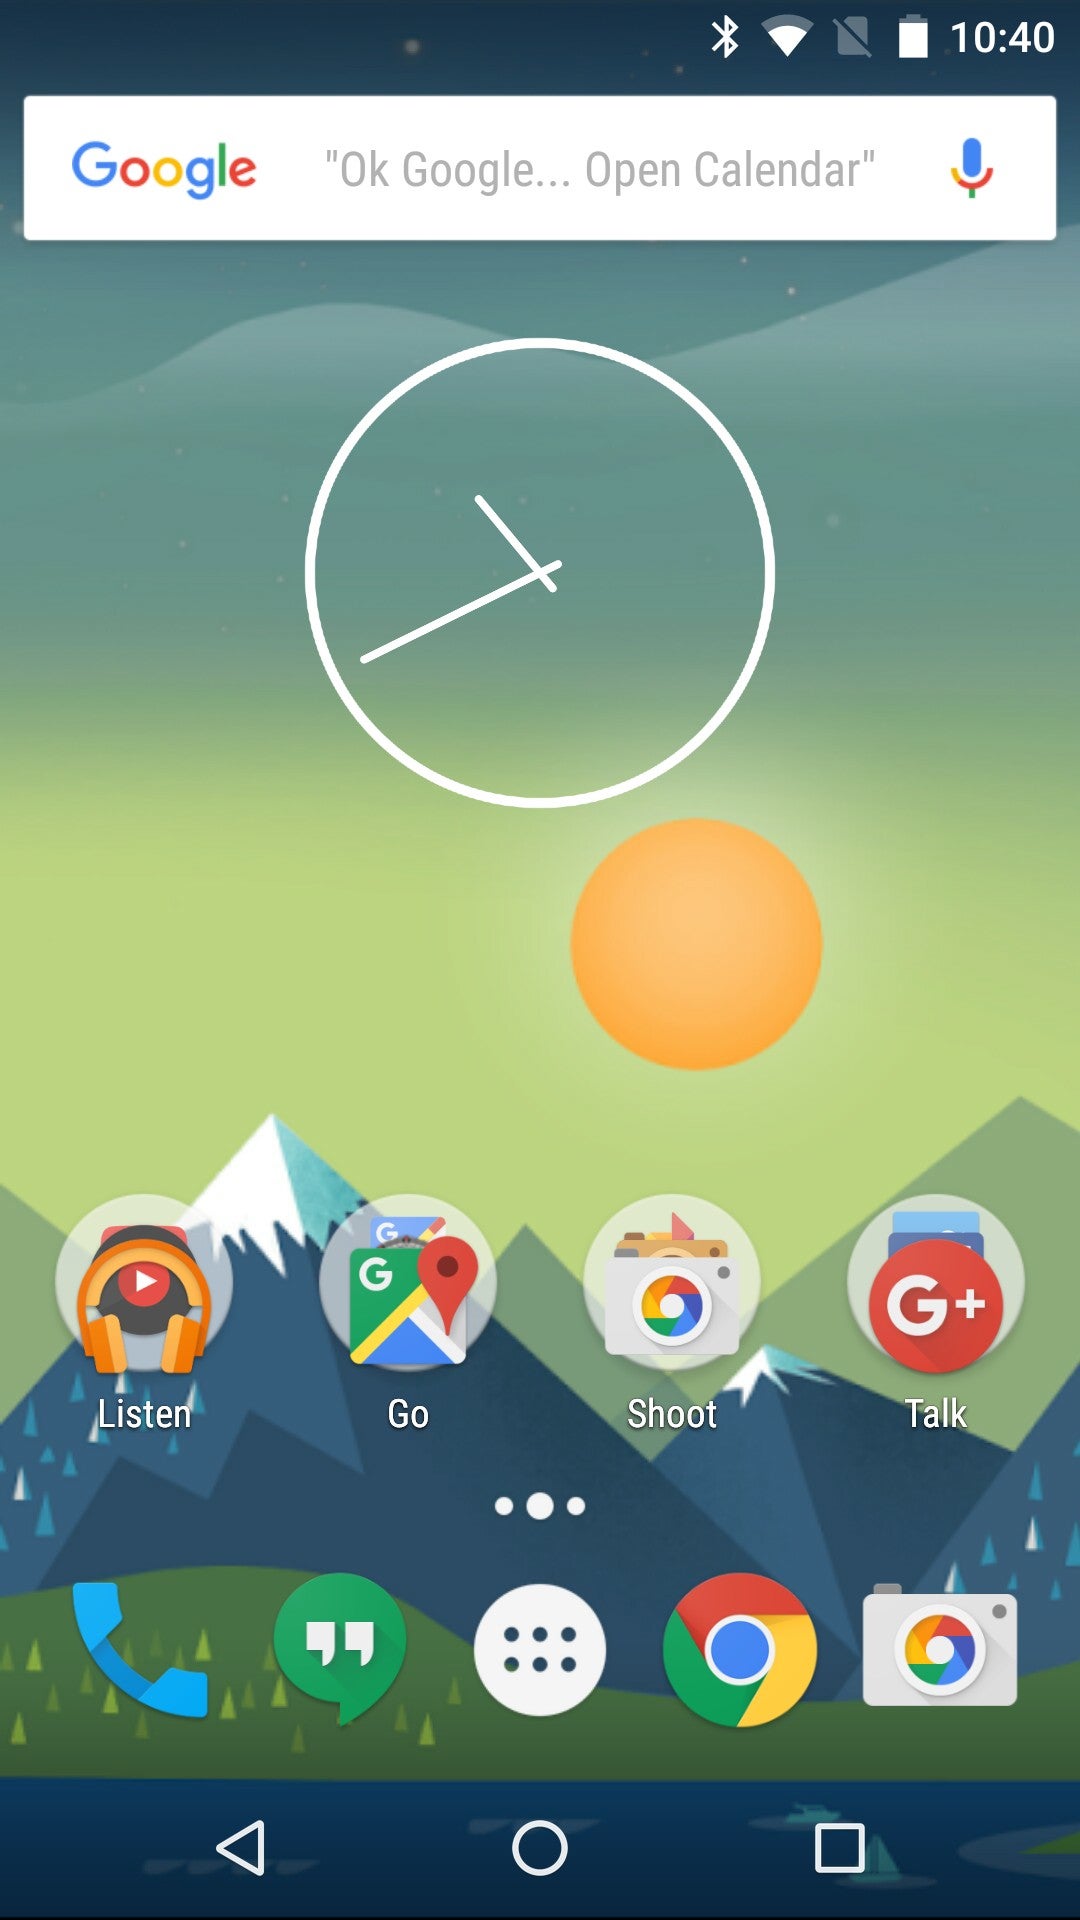 Previously, the analog clock widget was locked to this size... - Google Clock v4.3 arrives with neat UI touch-ups - Google's Clock app gets updated to v4.3, scores lots of visual touch-ups, download it here